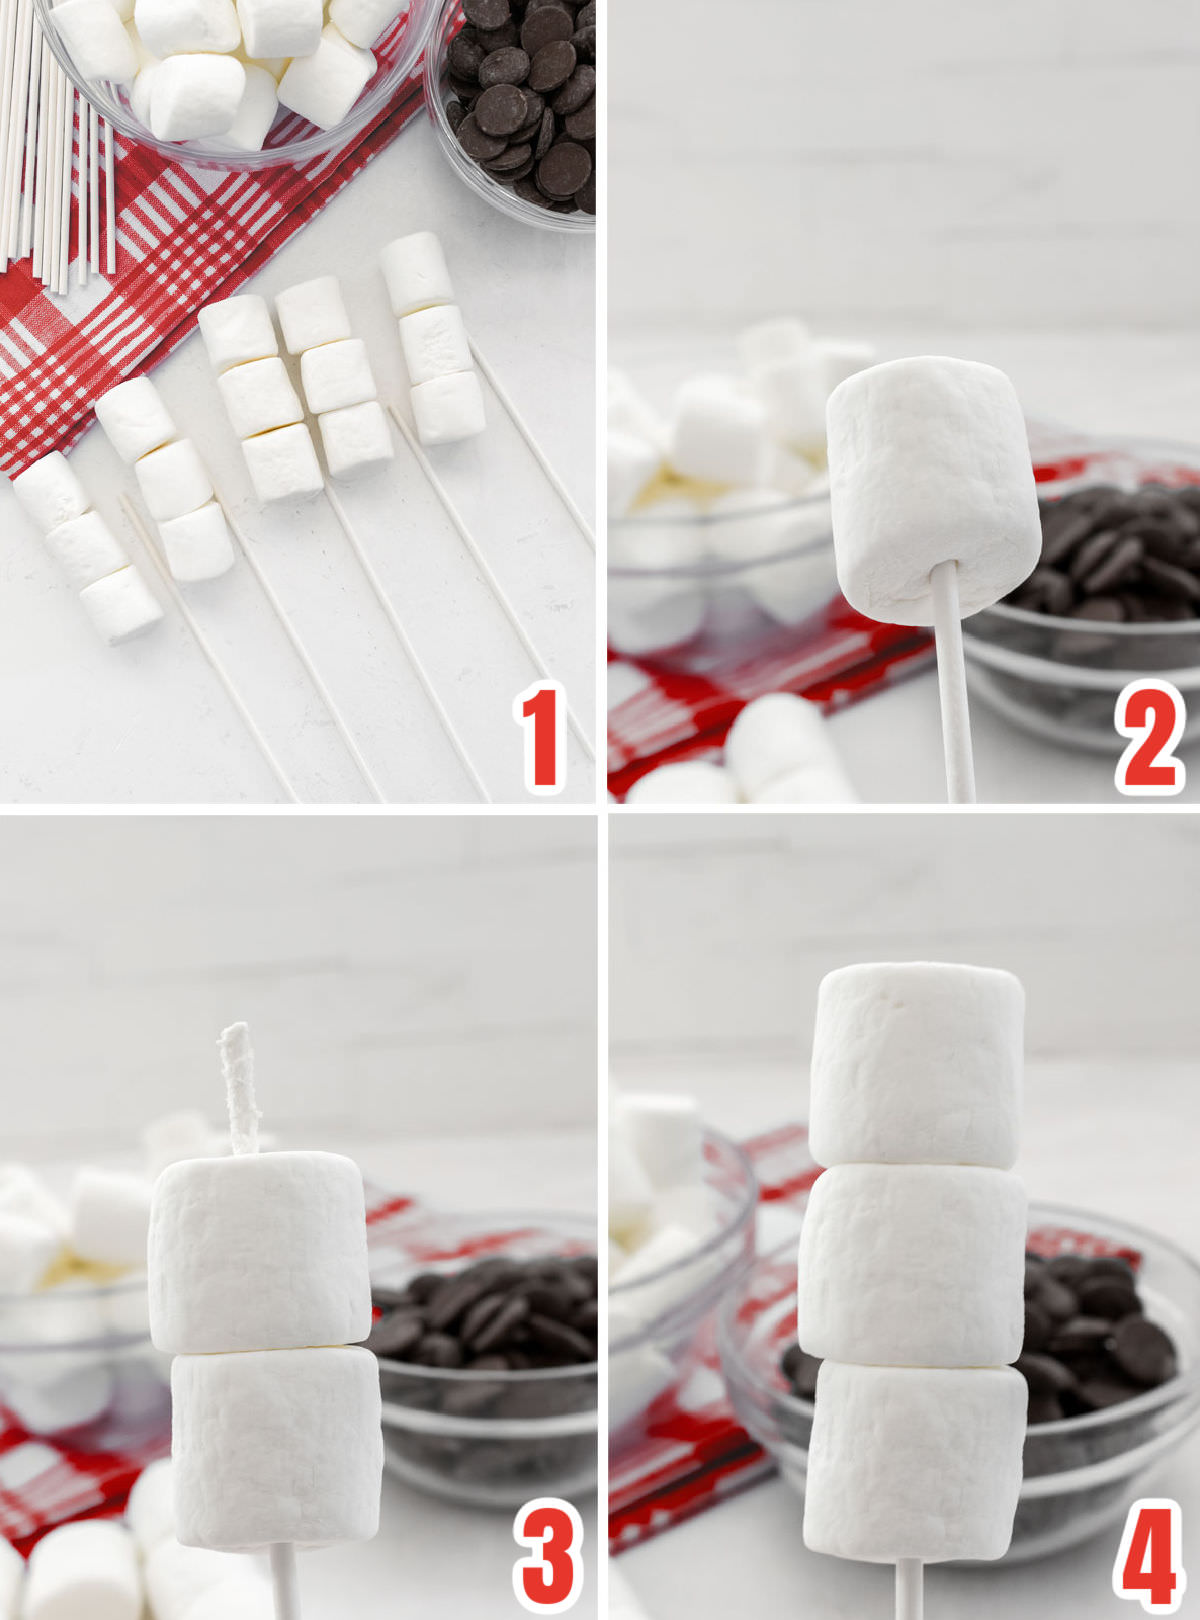 Collage image showing the steps you will need to take to create a marshmallow wand with marshmallows and a lollipop stick.